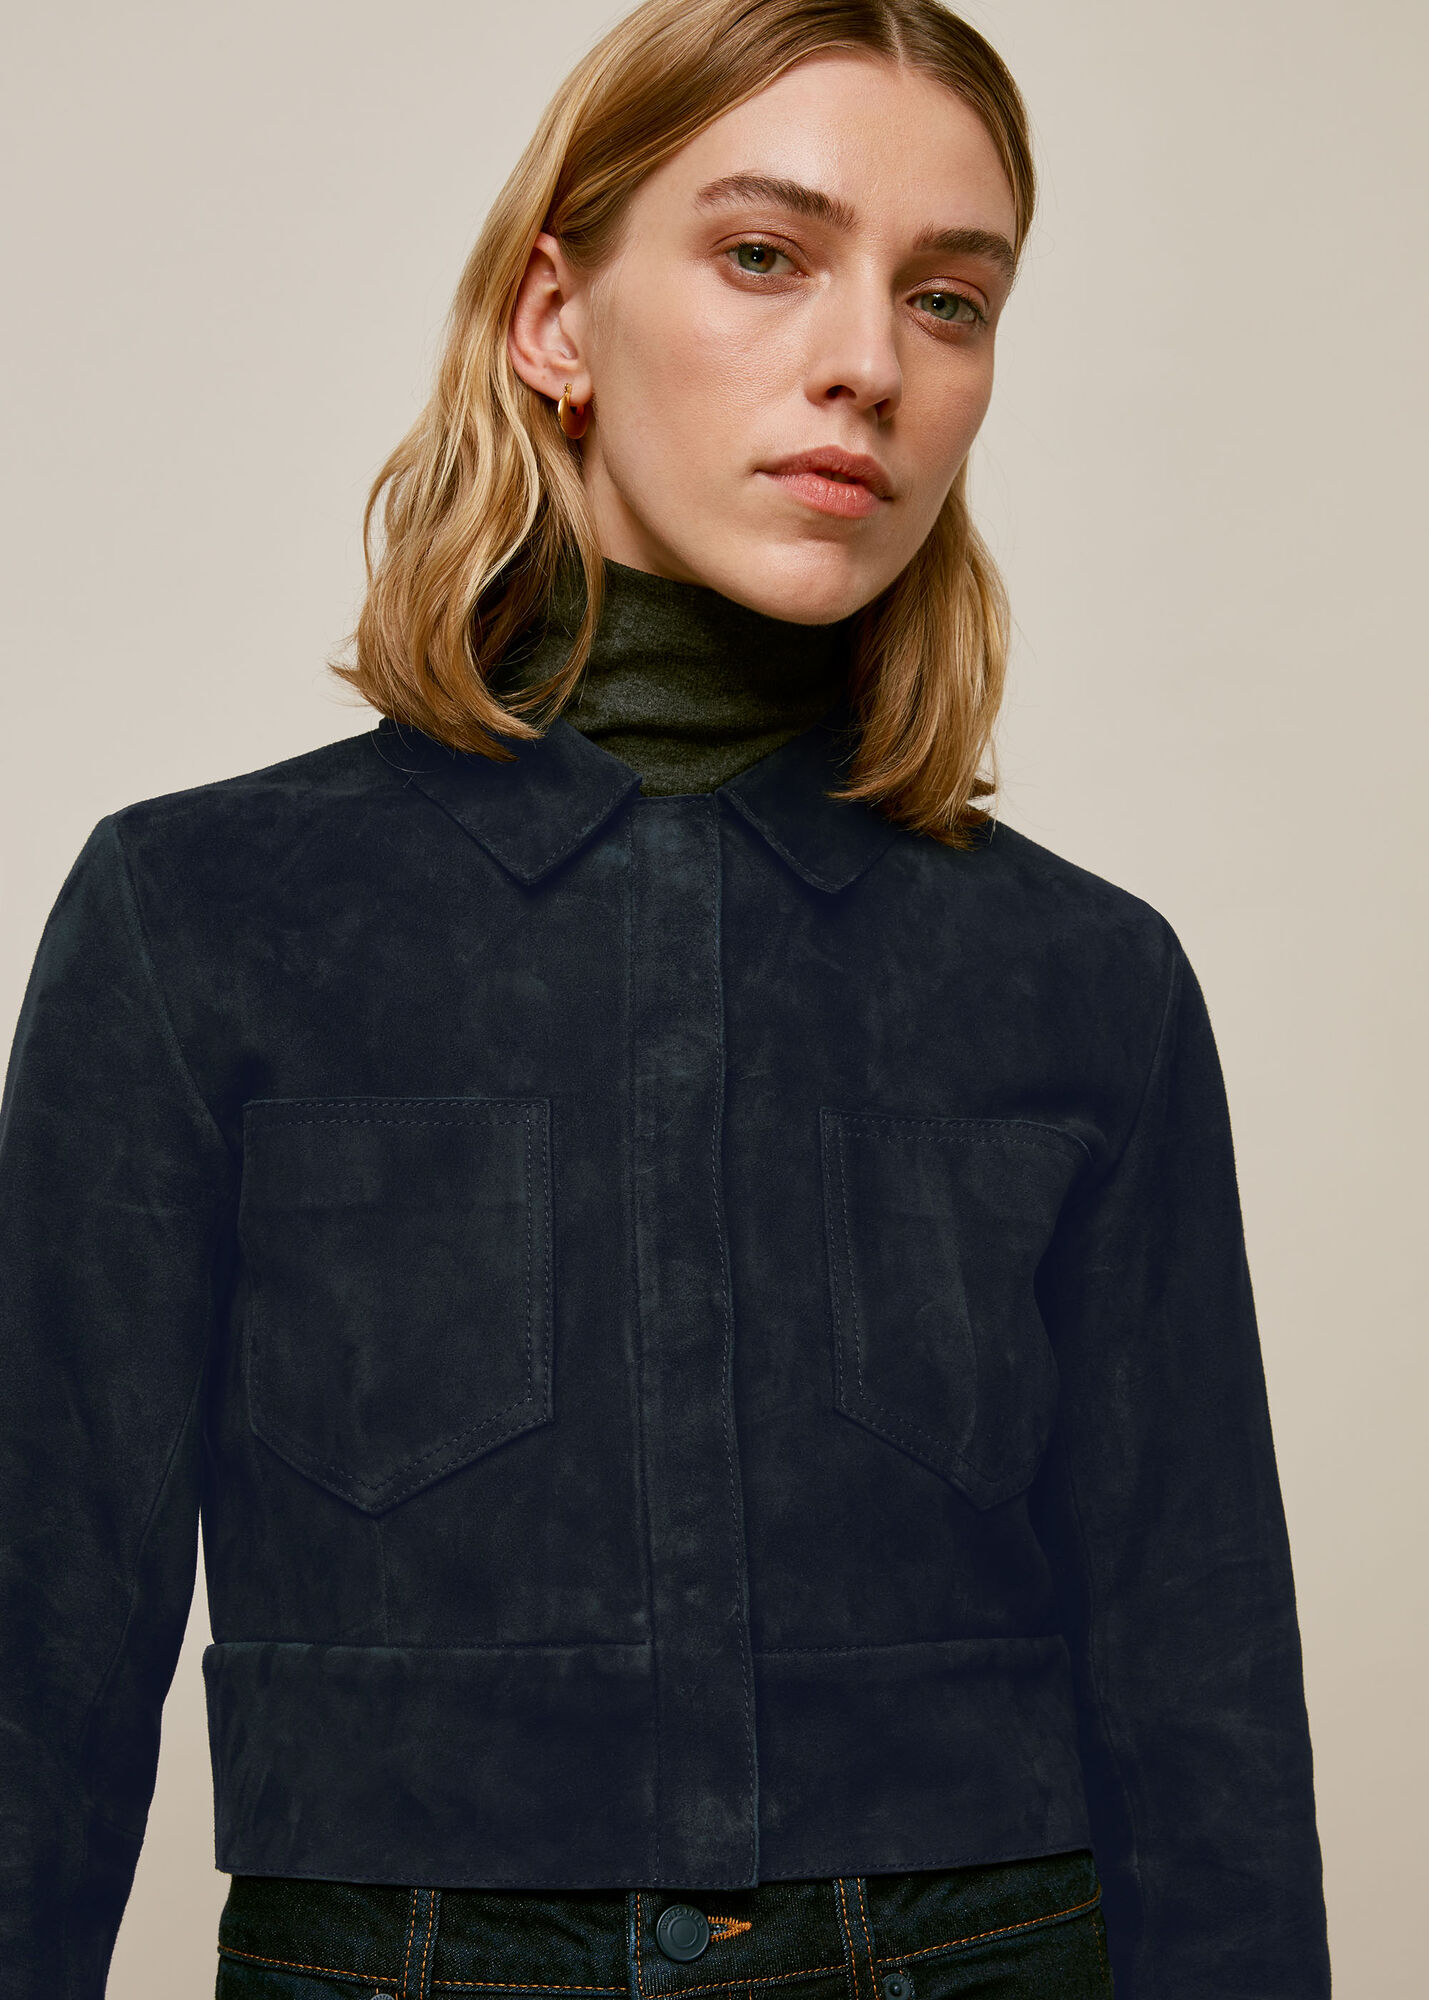 Navy Selena Cropped Suede Jacket | WHISTLES